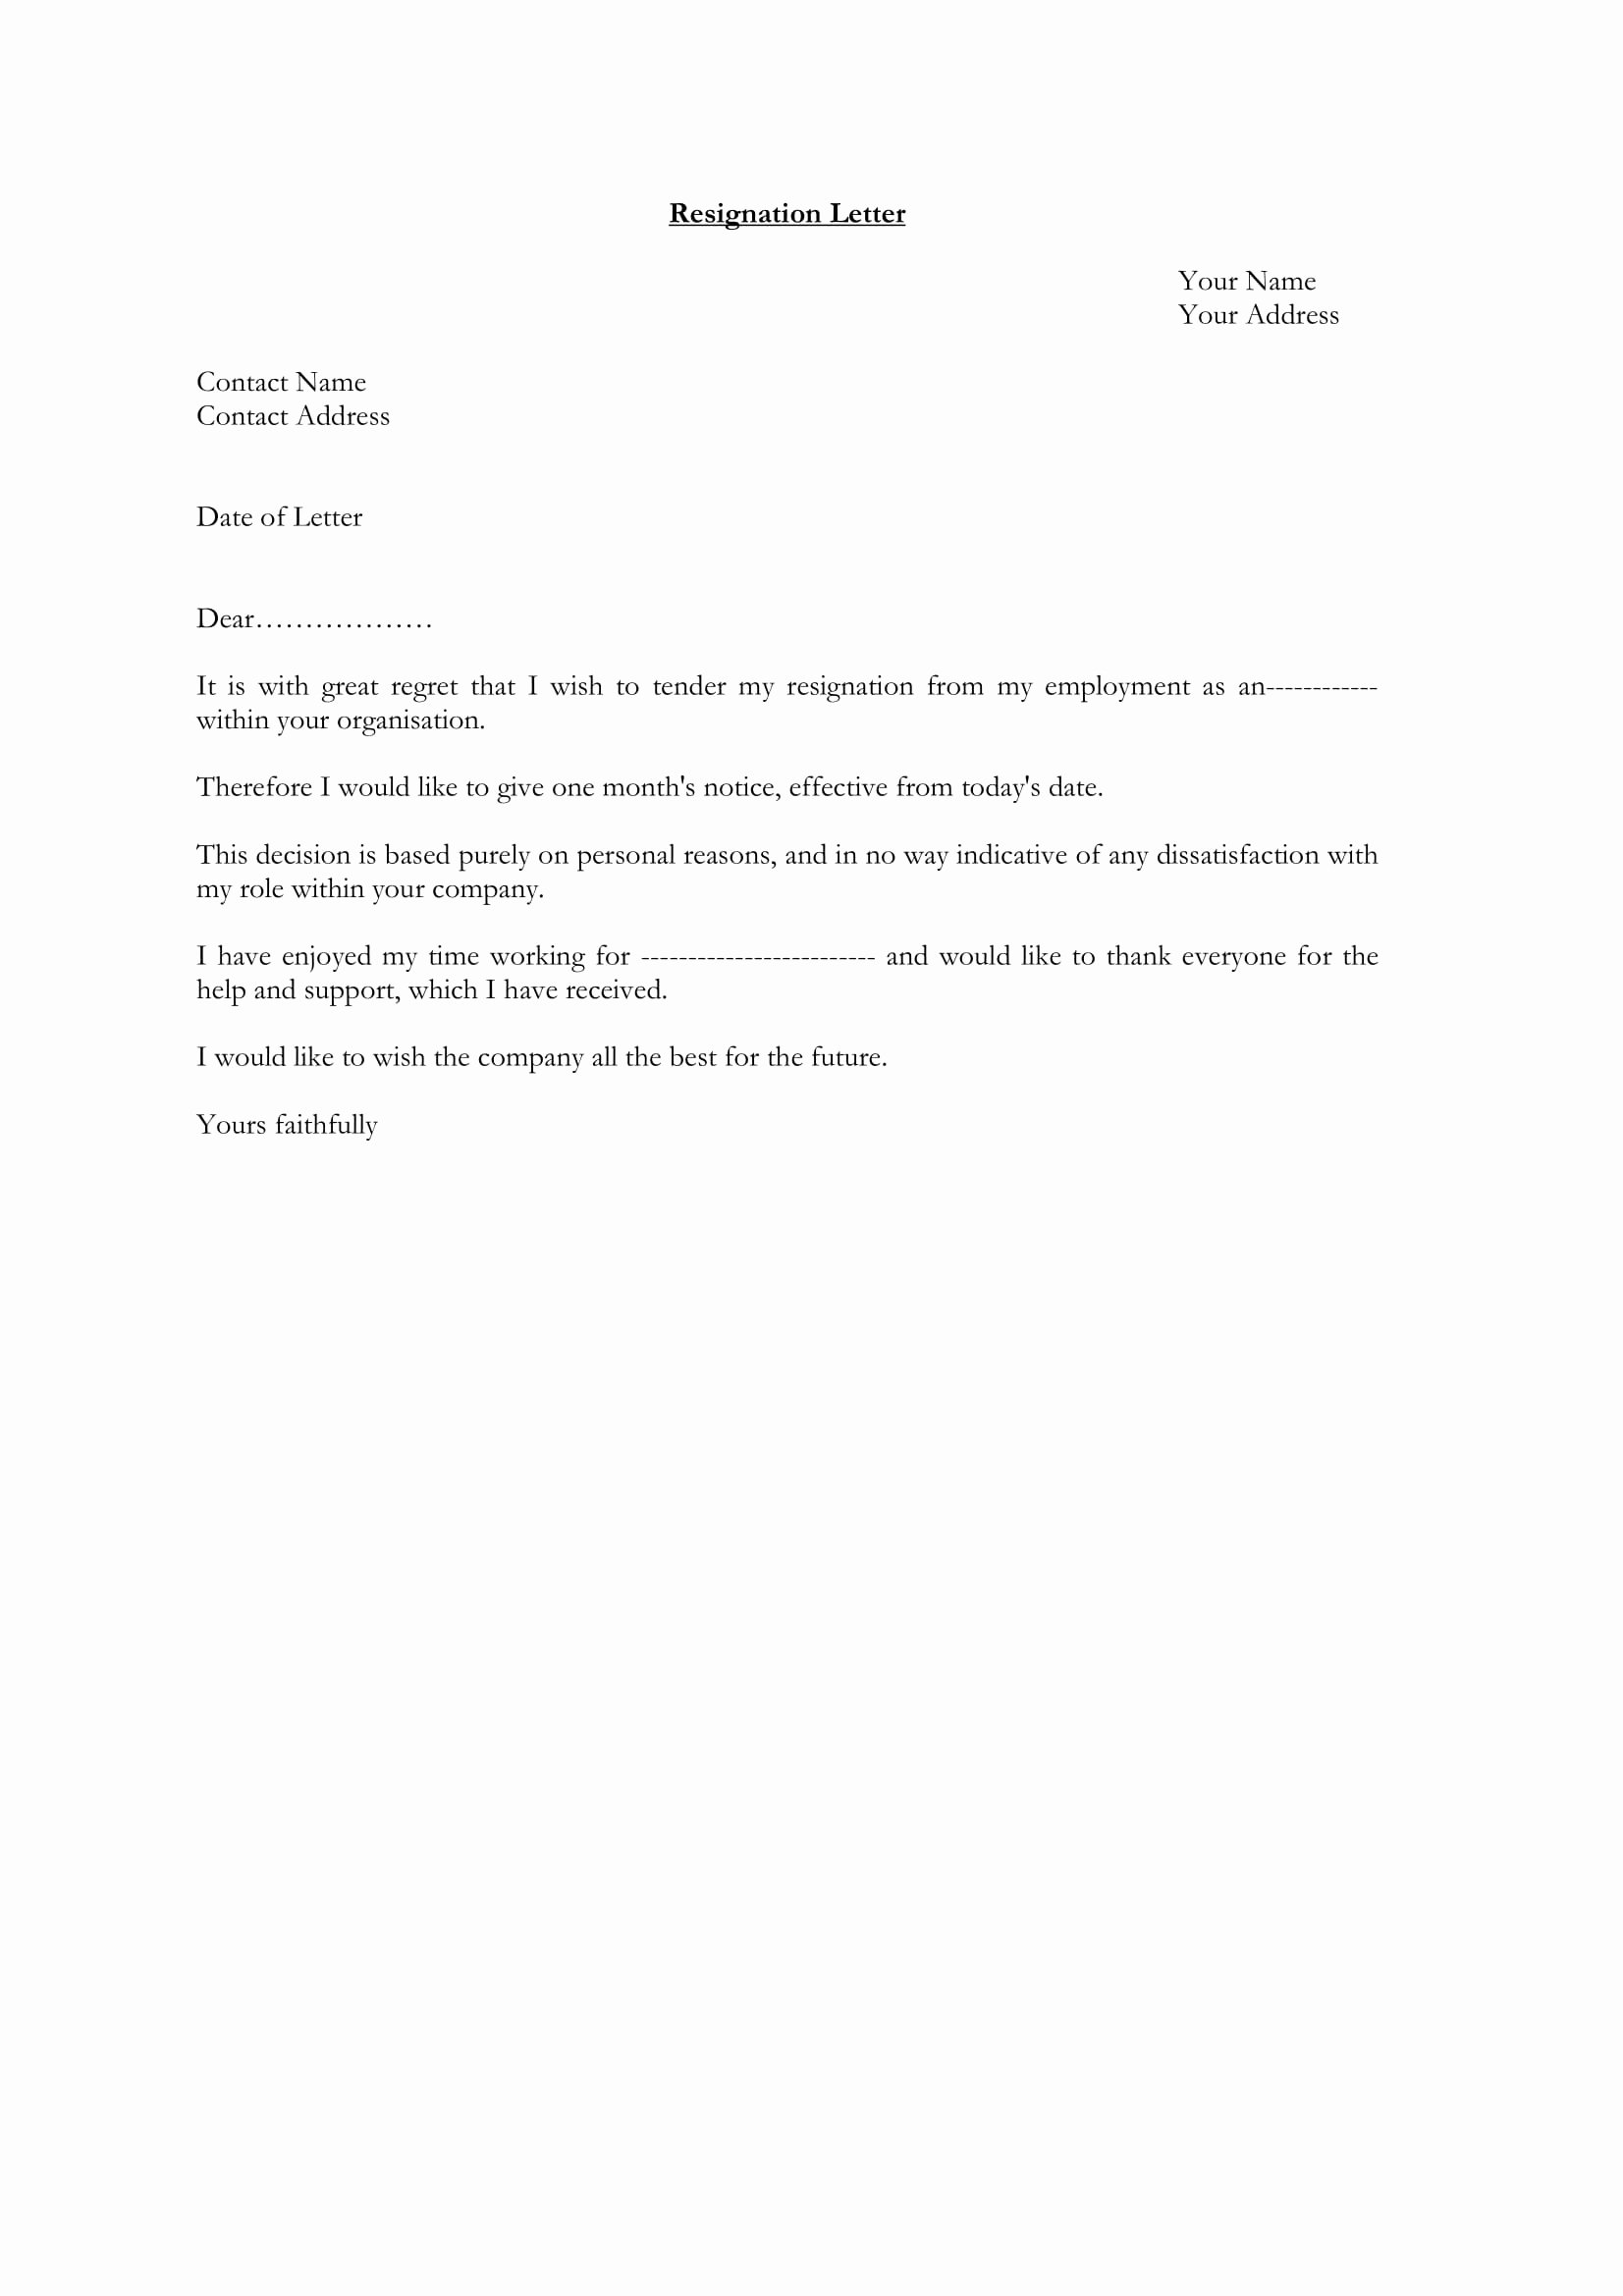 Resign Letter Sample Awesome 35 Simple Resignation Letter Examples Pdf Word